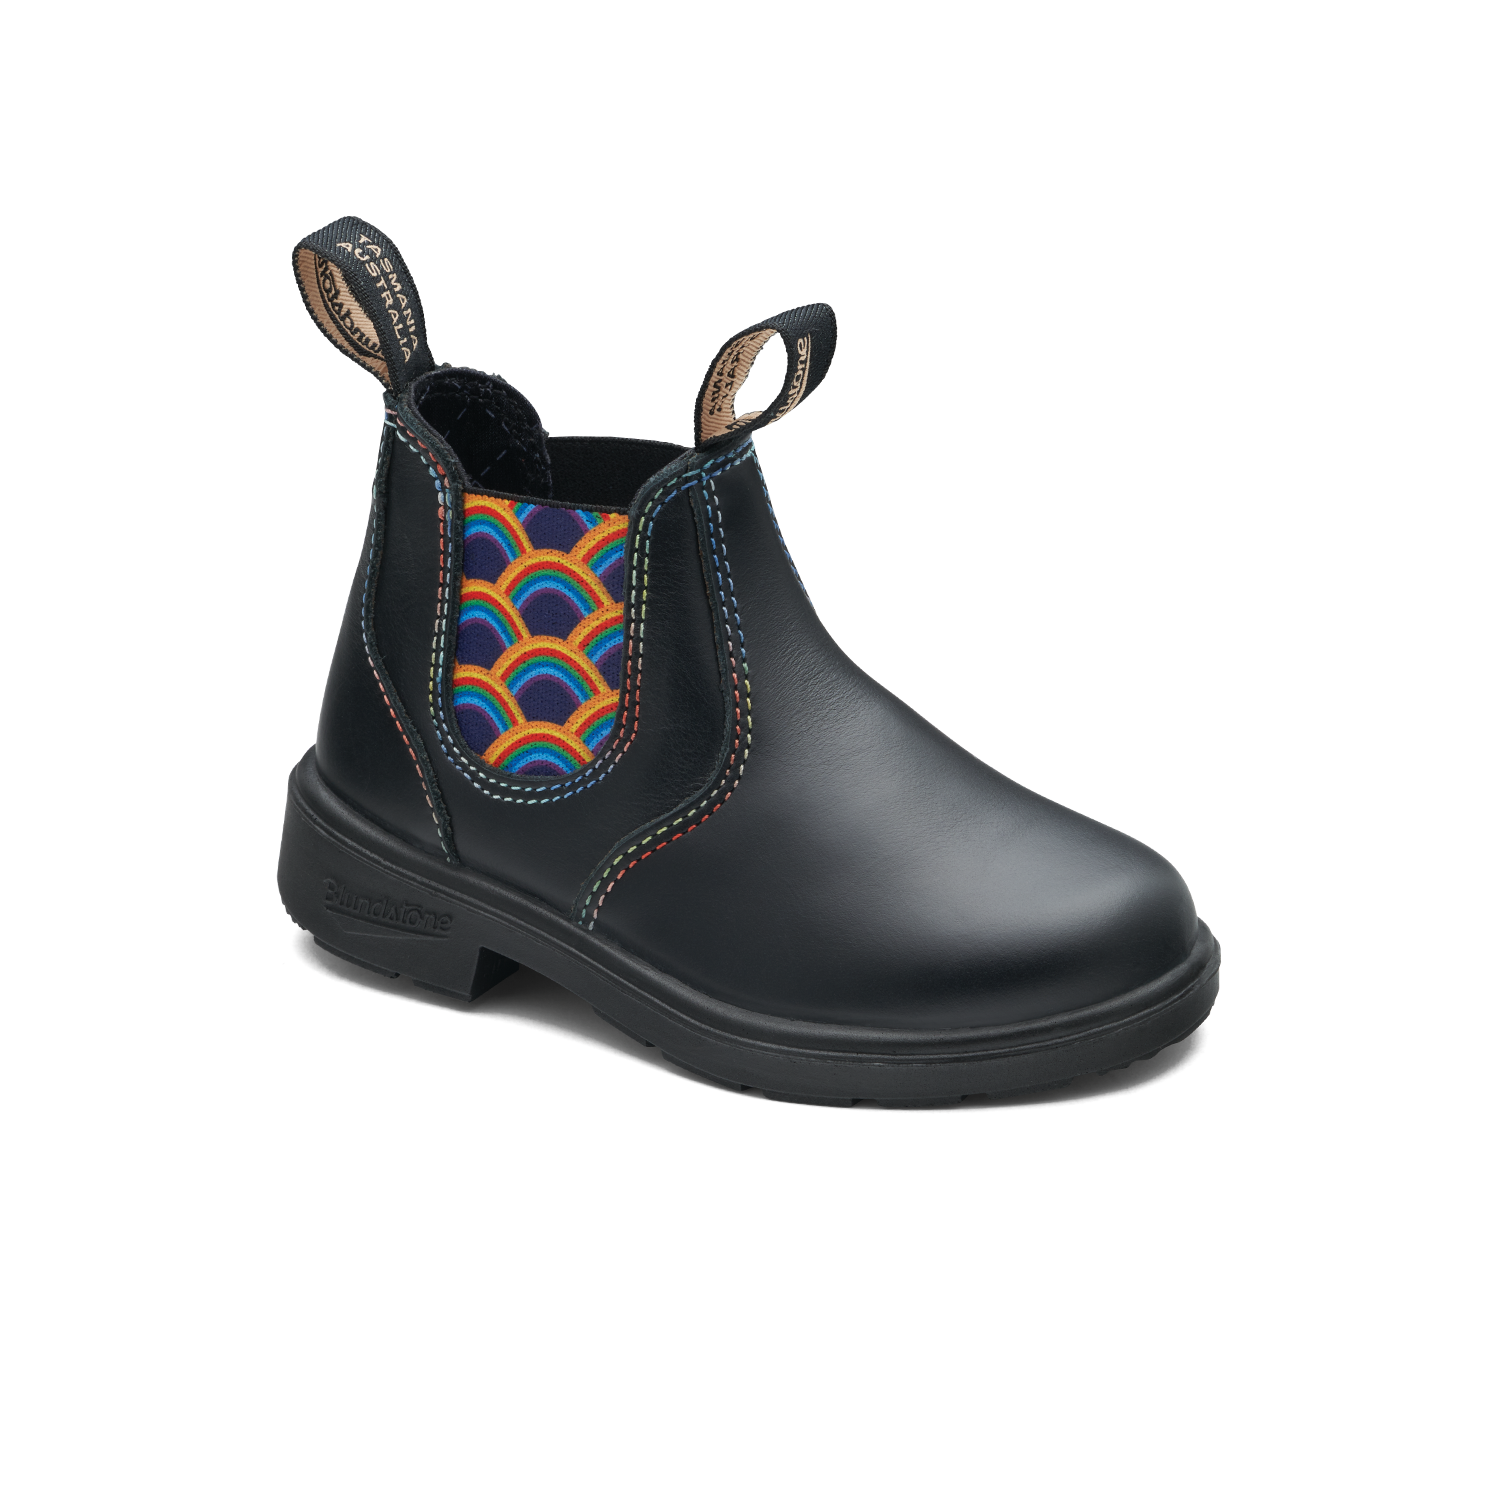 Blundstone 2254 Kids Black with Rainbow Elastic and Contrast Stitching